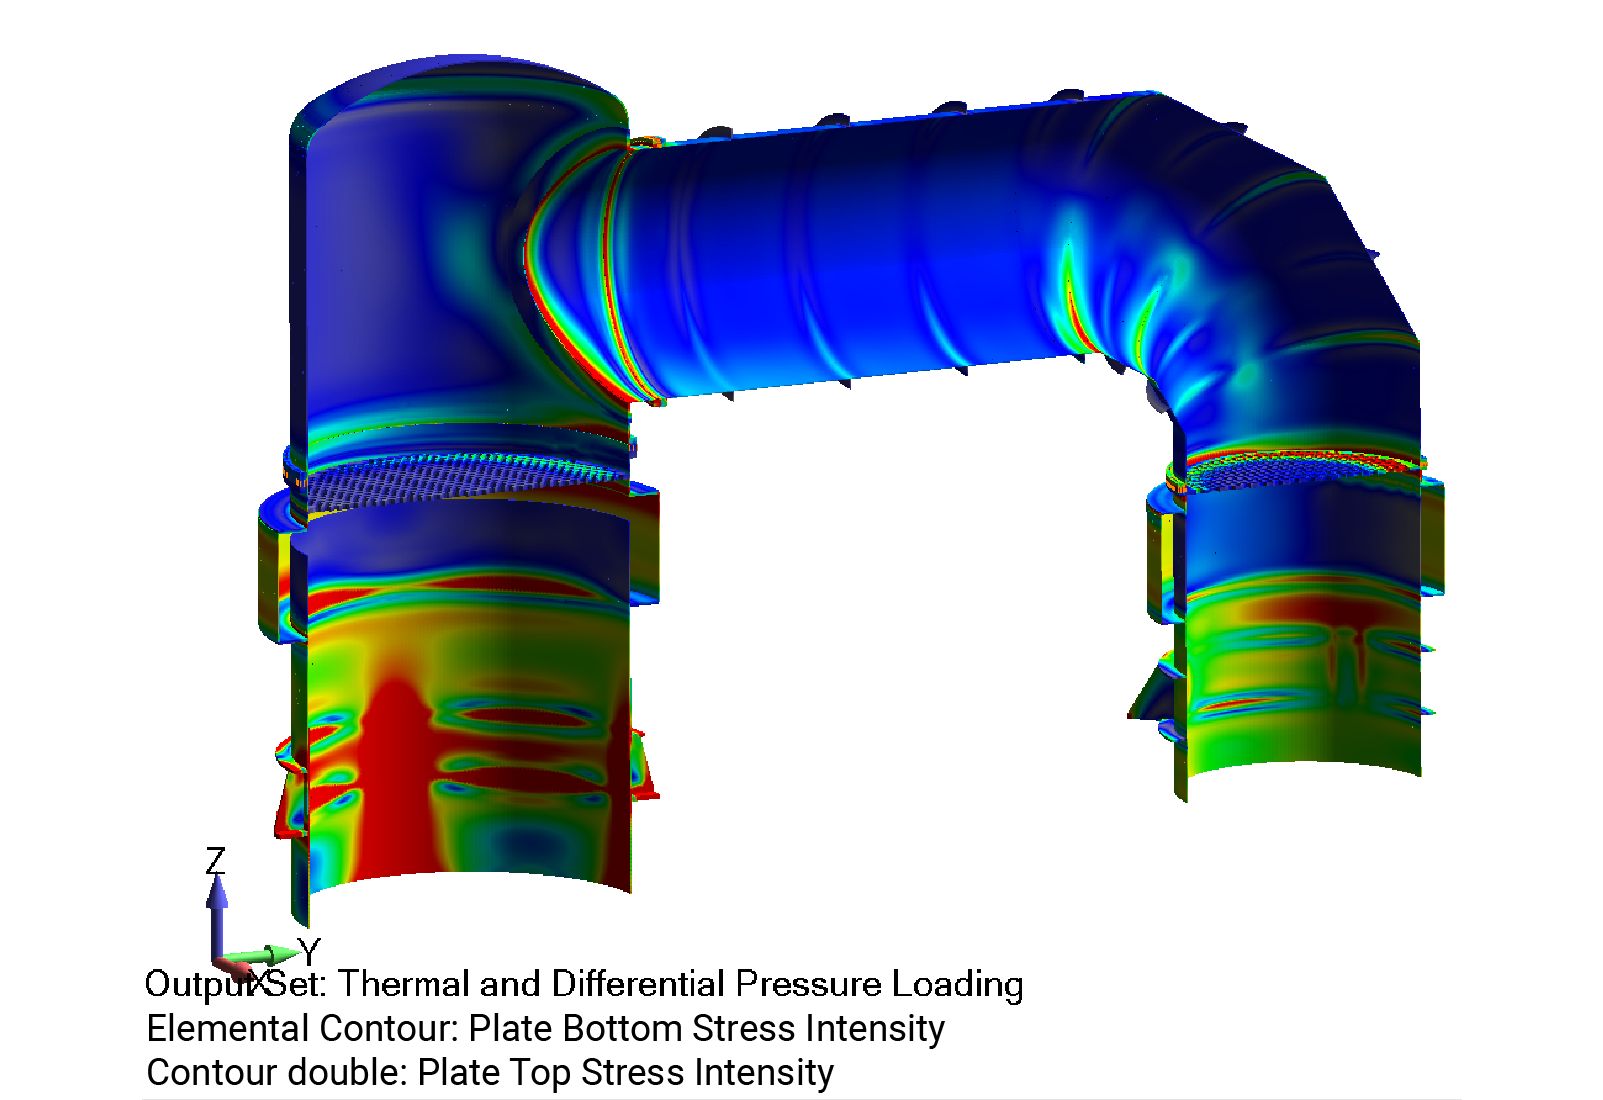 ASME Section VIII, Division 2 stress intensity contour plot over condenser - Predictive Engineering ASME BPVC Pressure Vessel Consulting Services